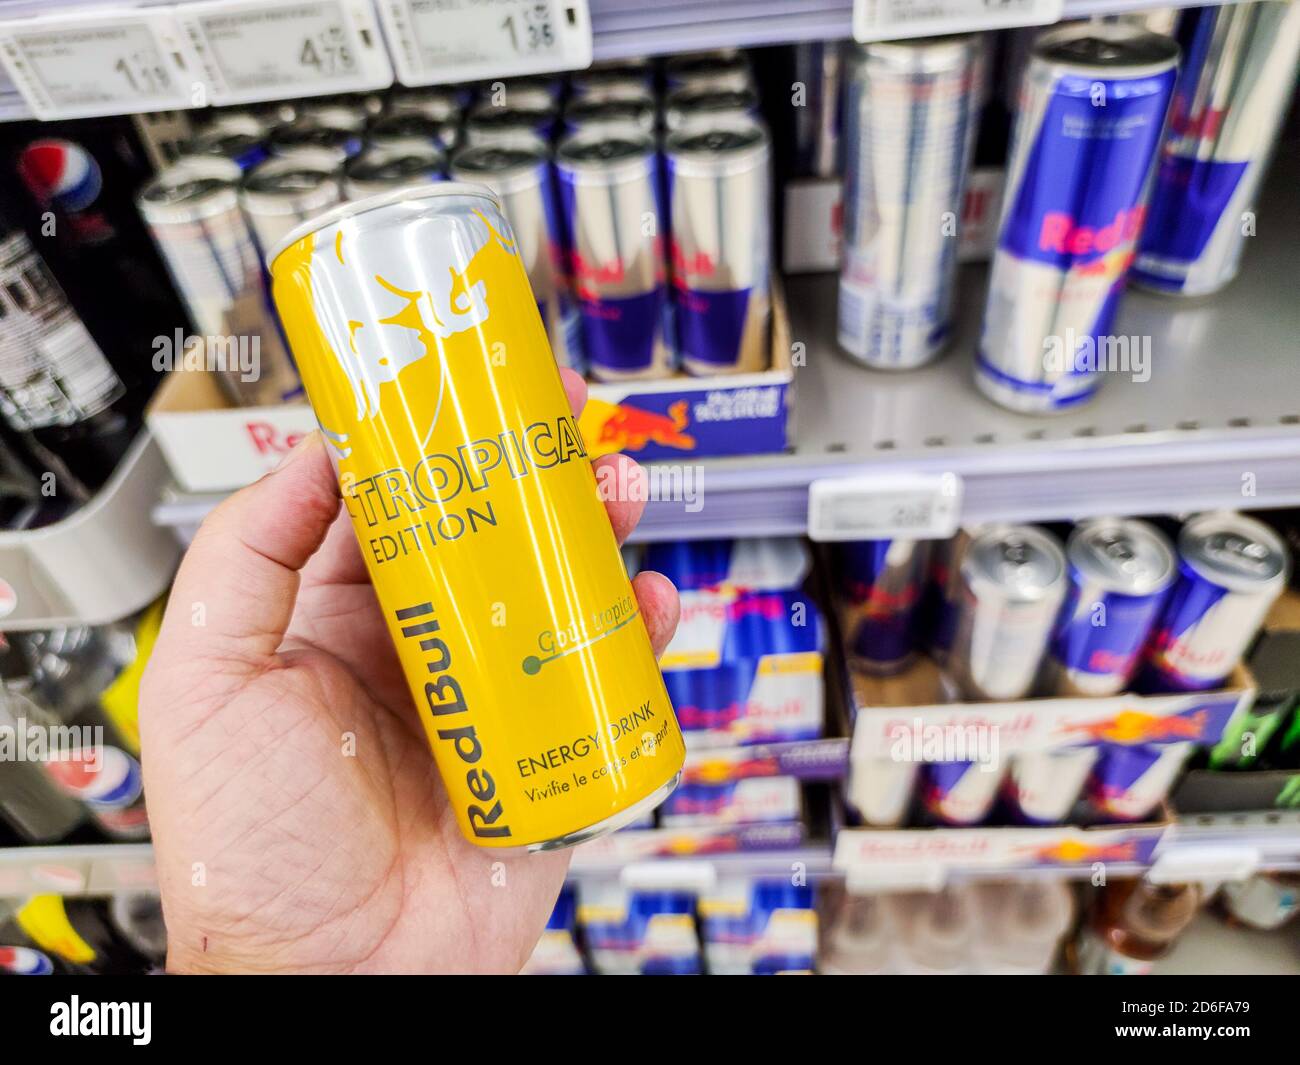 Puilboreau, France - October 14, 2020:Selected Focus on Cans of Red Bull Energy Drink Tropical edition display for sell in the supermarket shelves. Re Stock Photo